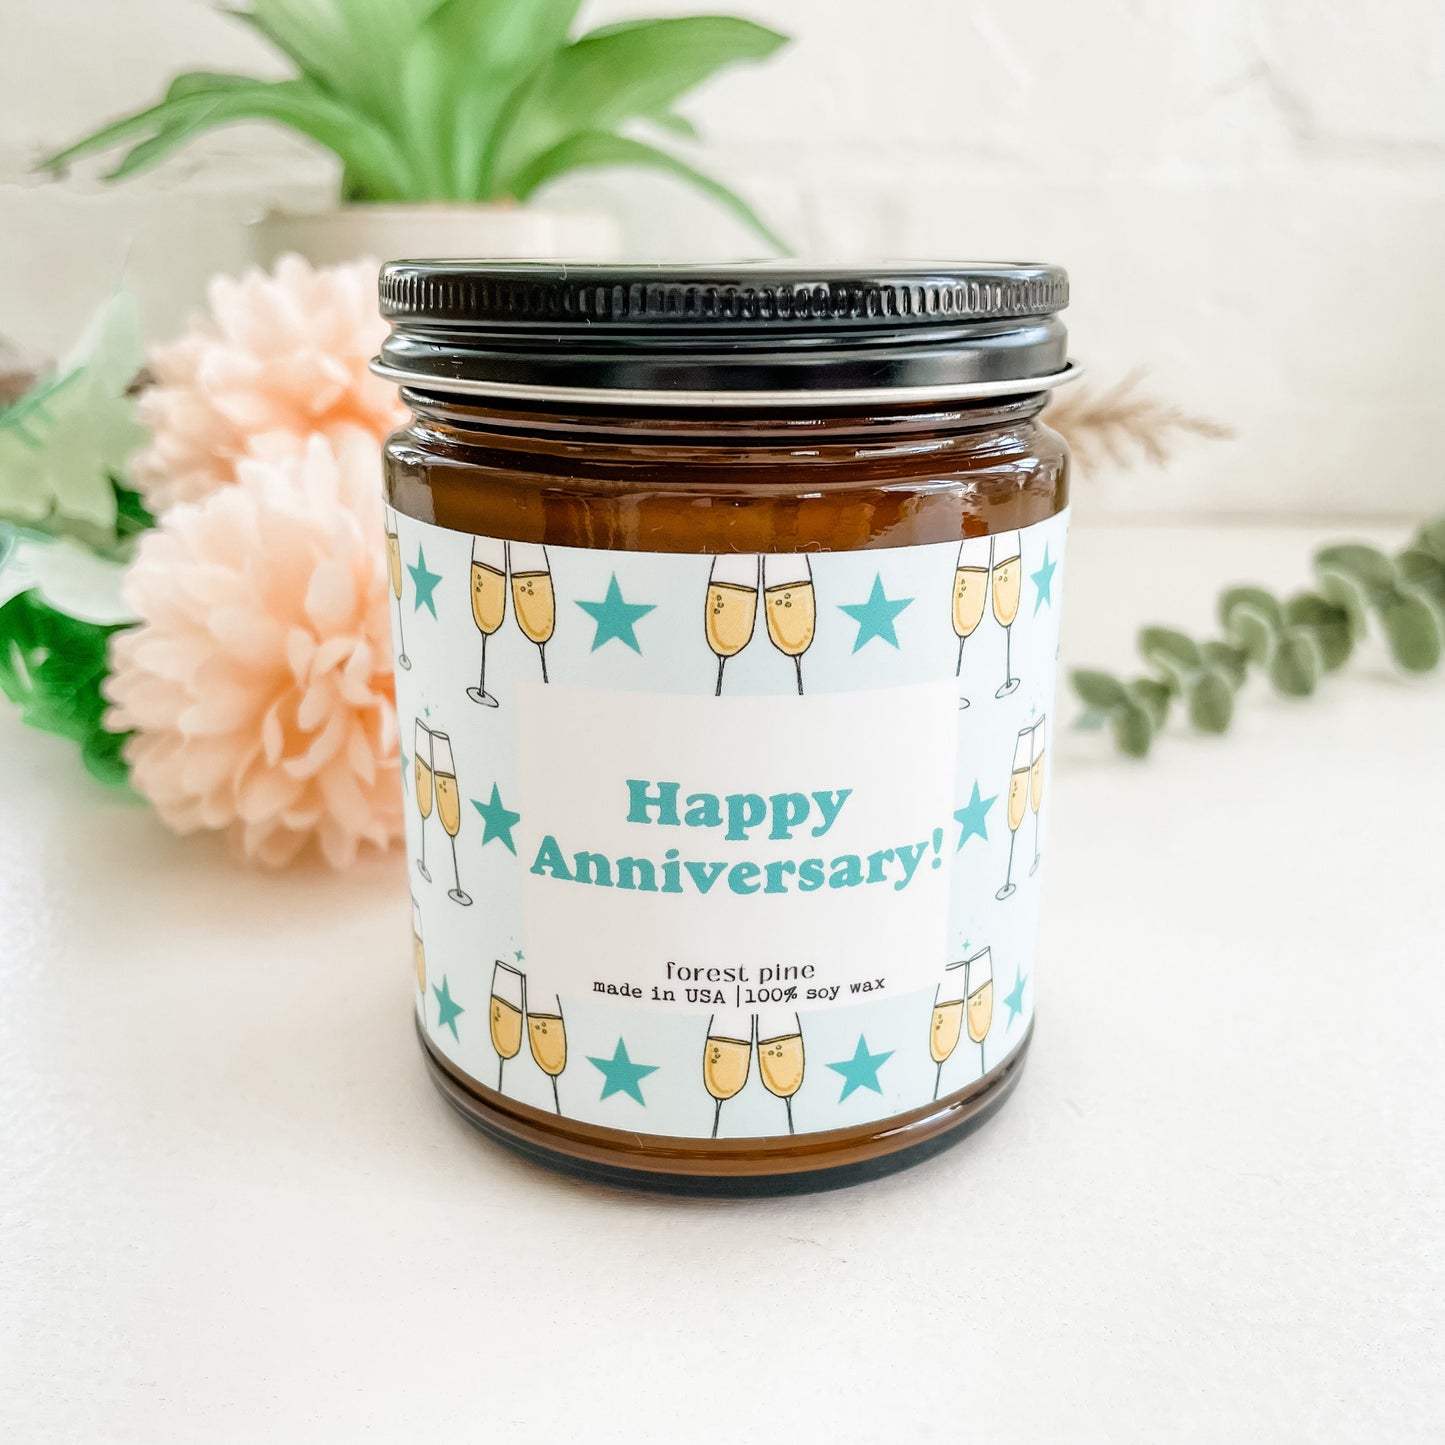 Happy Anniversary - 9oz Glass Jar Soy Candle - Forest Pine Scent